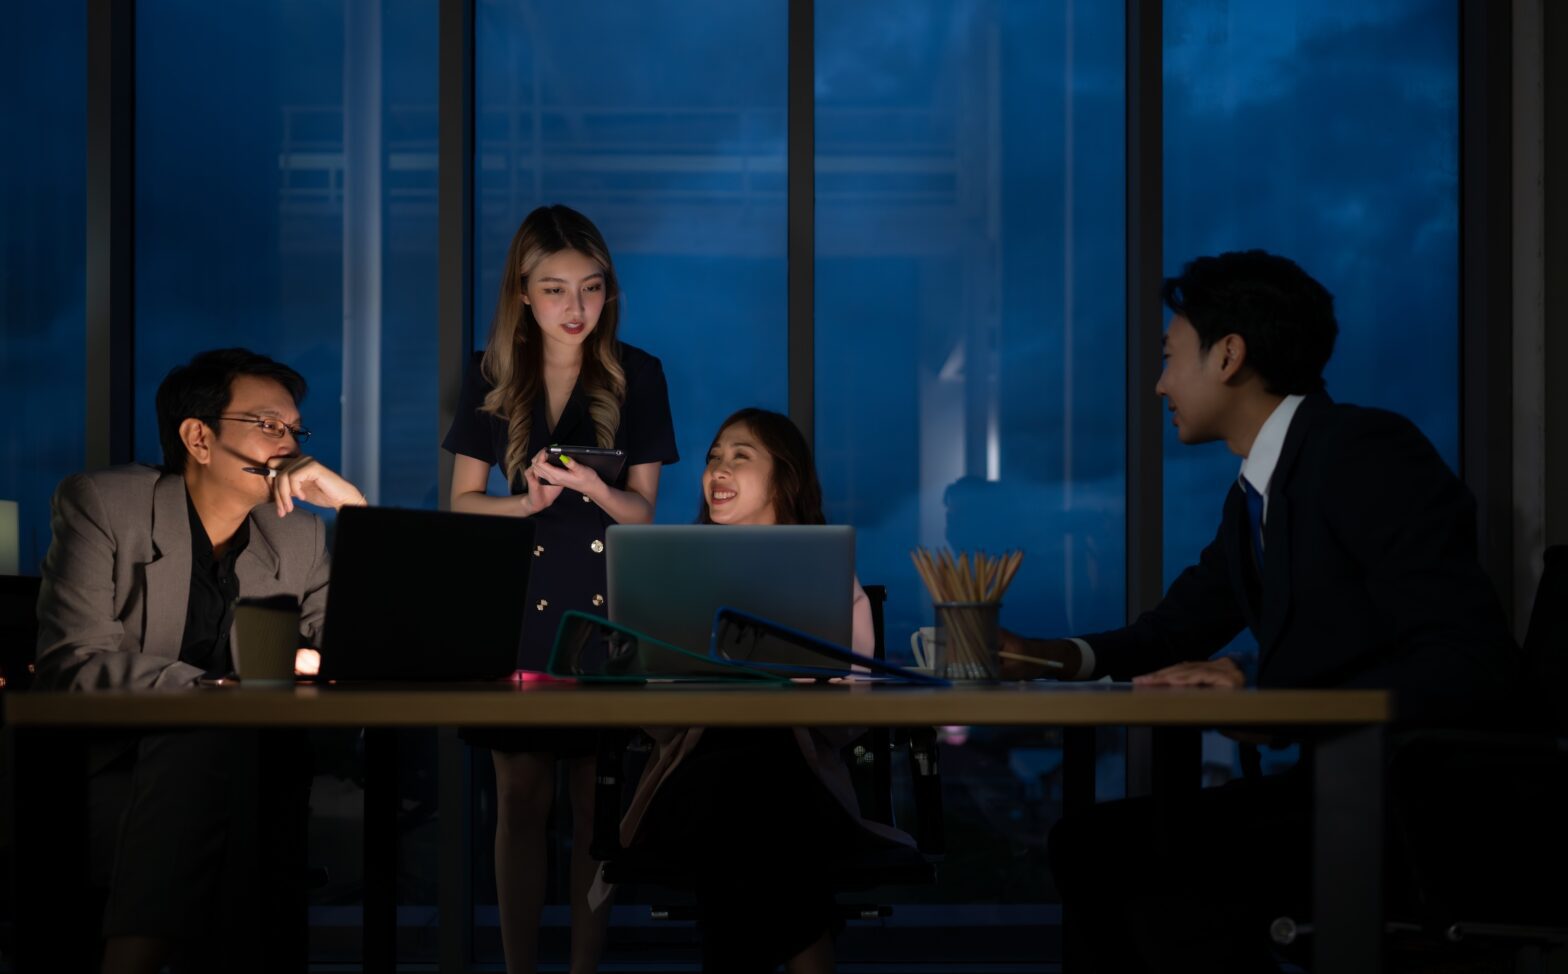 Group,Of,Business,People,Working,In,Office,At,Night.,Business